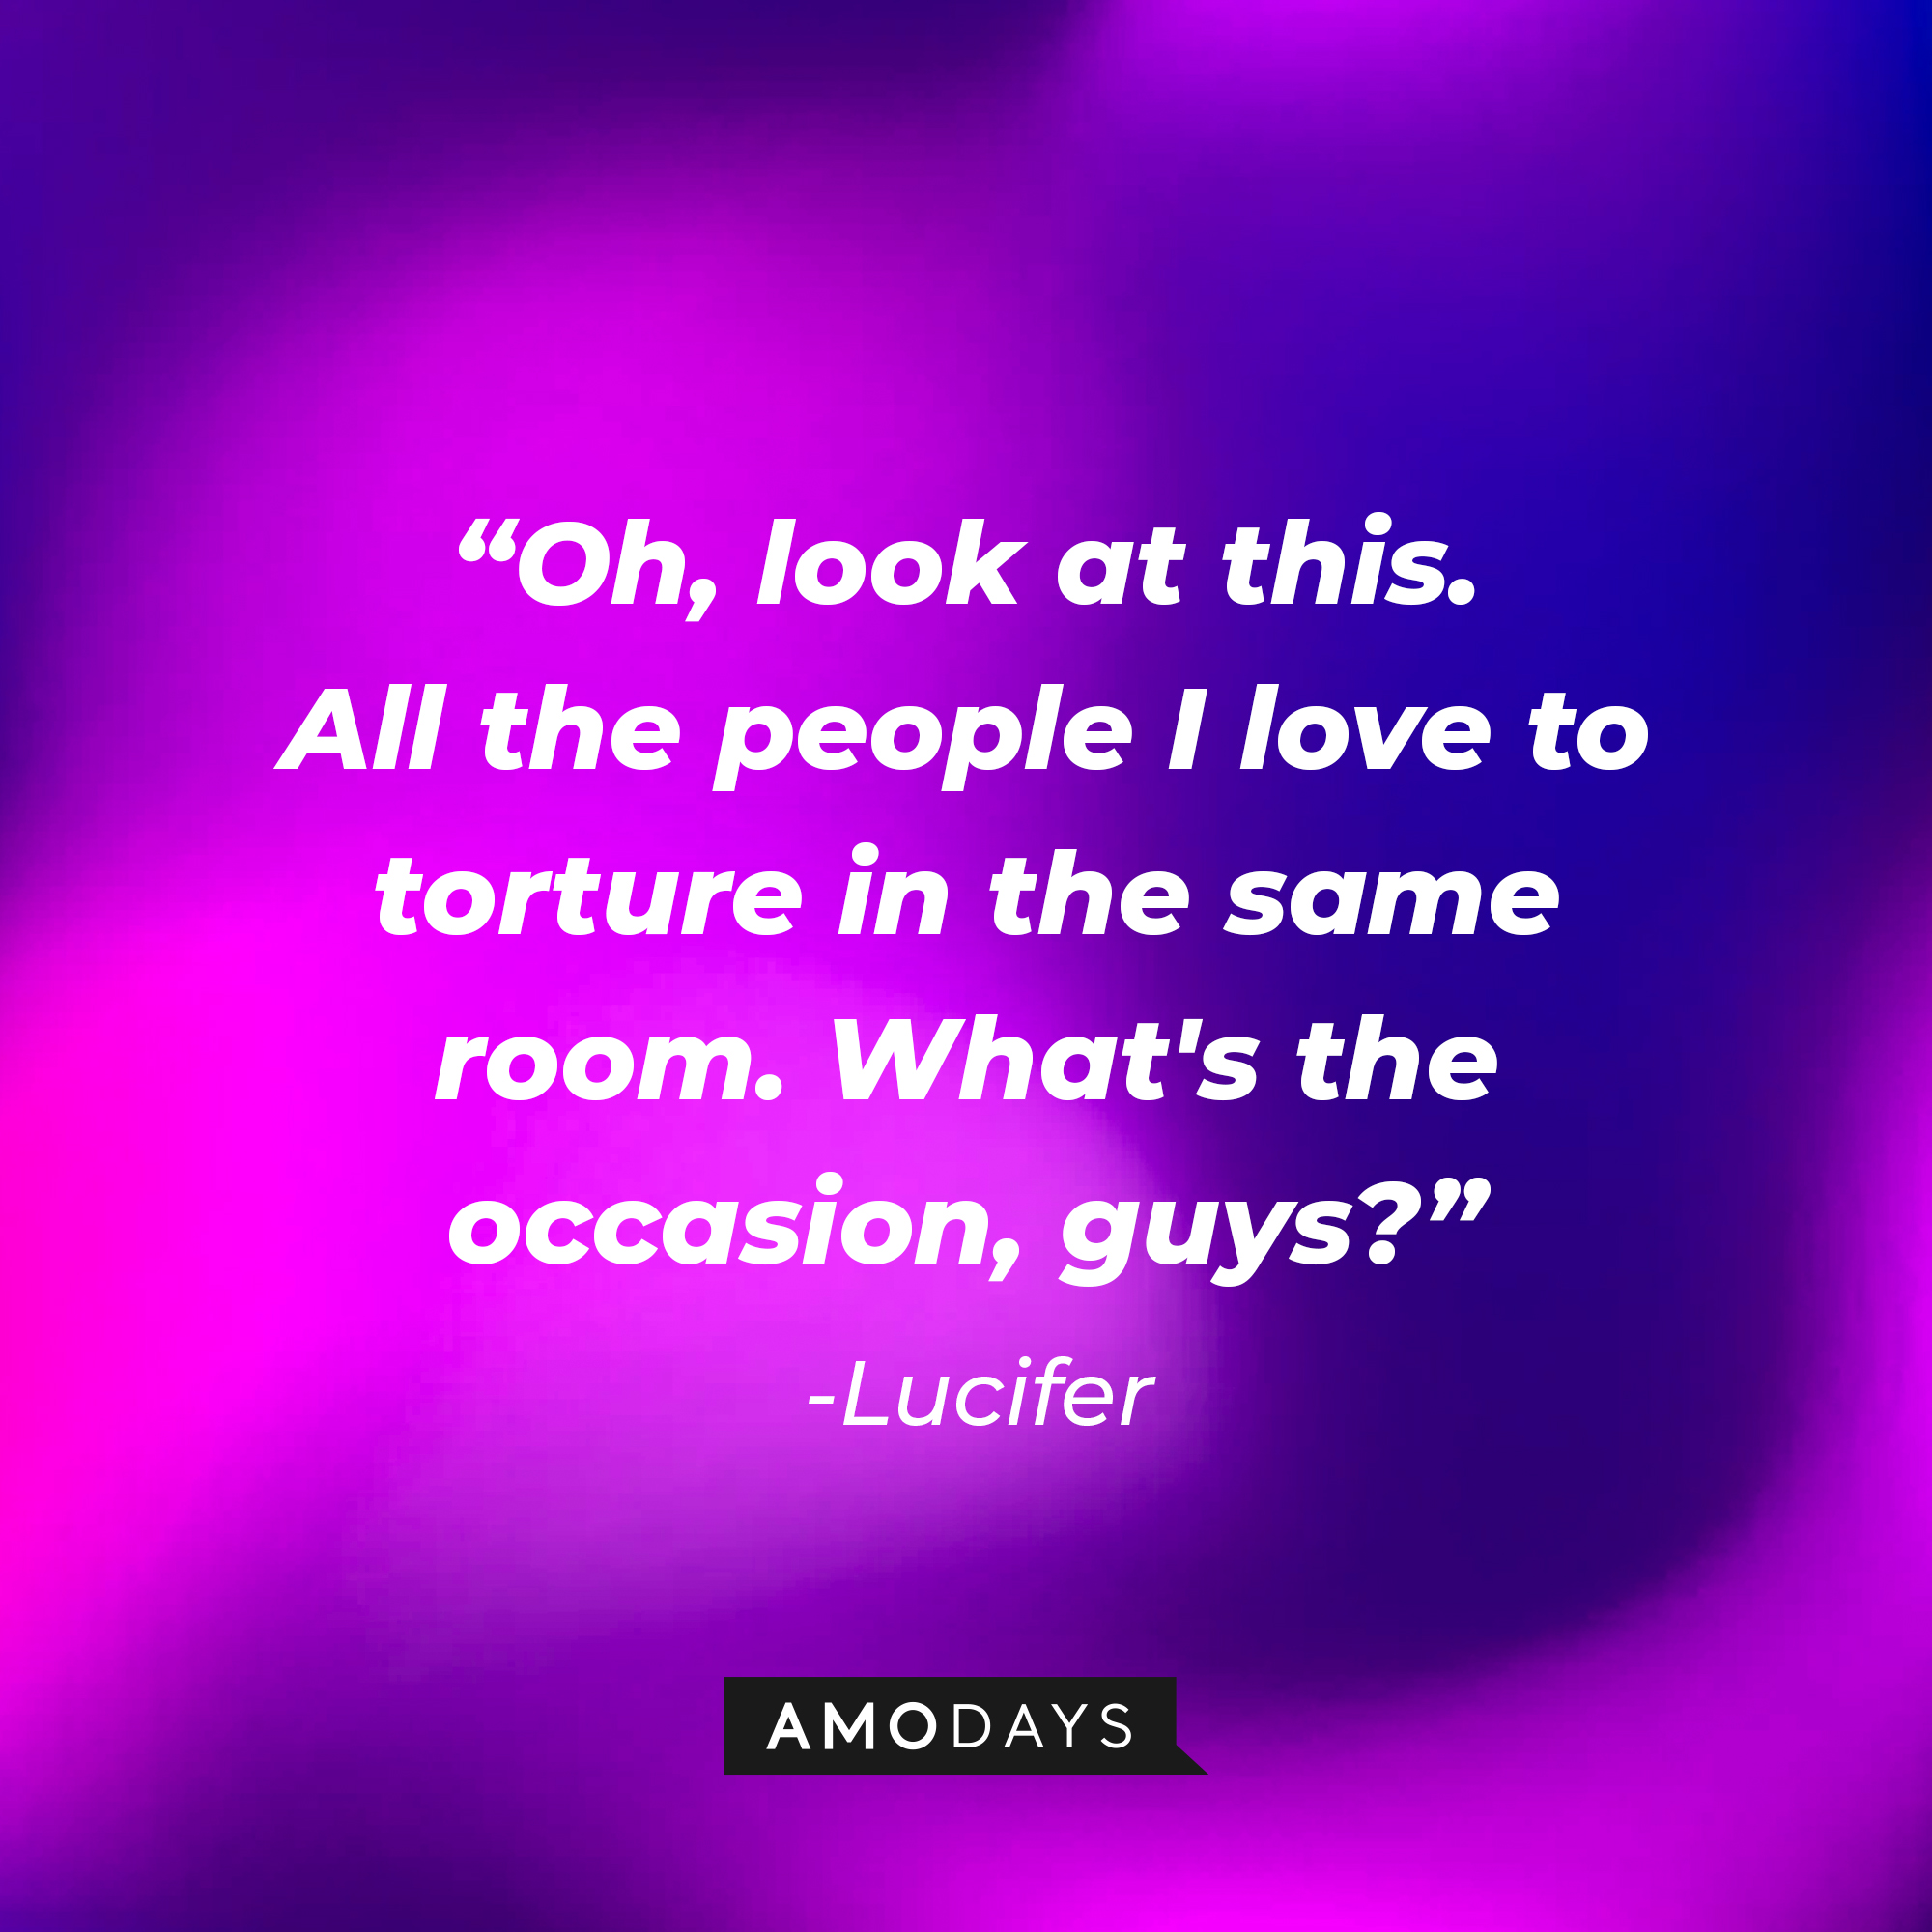 Lucifer’s quote: “Oh, look at this. All the people I love to torture in the same room. What's the occasion, guys?" | Source: AmoDays